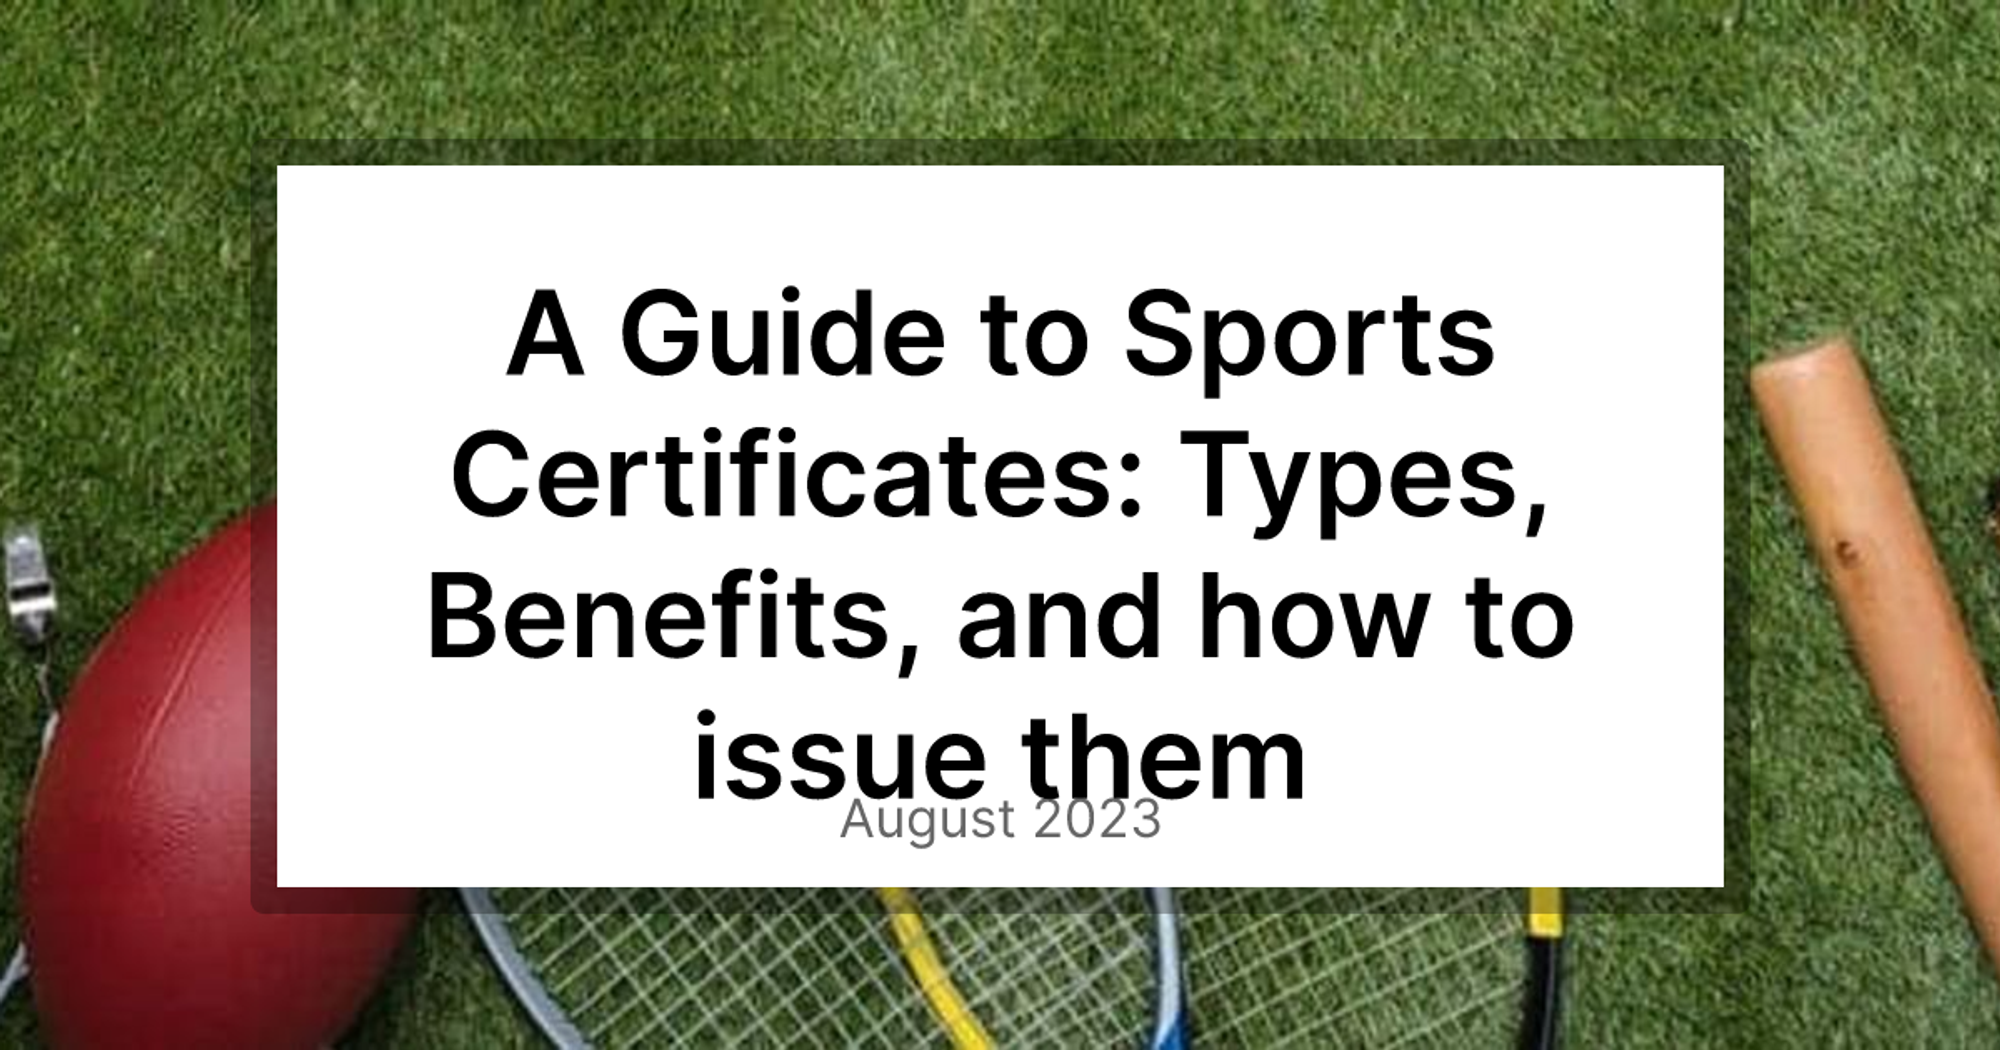 A Guide to Sports Certificates: Types, Benefits, and how to issue them